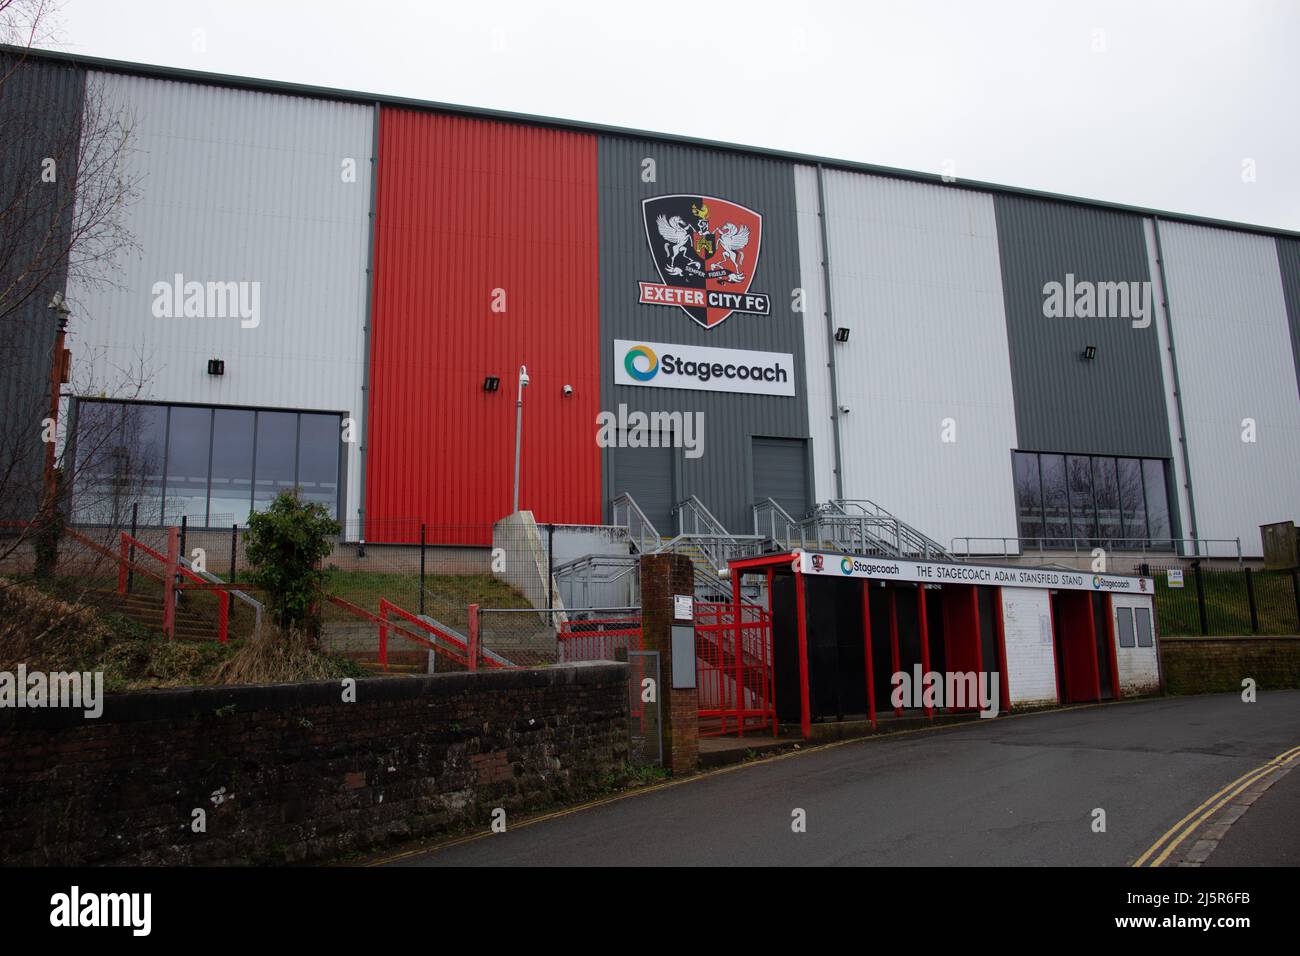 EXETER, UK - MARCH 3, 2021 CoVid-19 lockdown main gate and new stand for Exeter City FC, also known as the Grecians, playing at St James Park, stadium Stock Photo